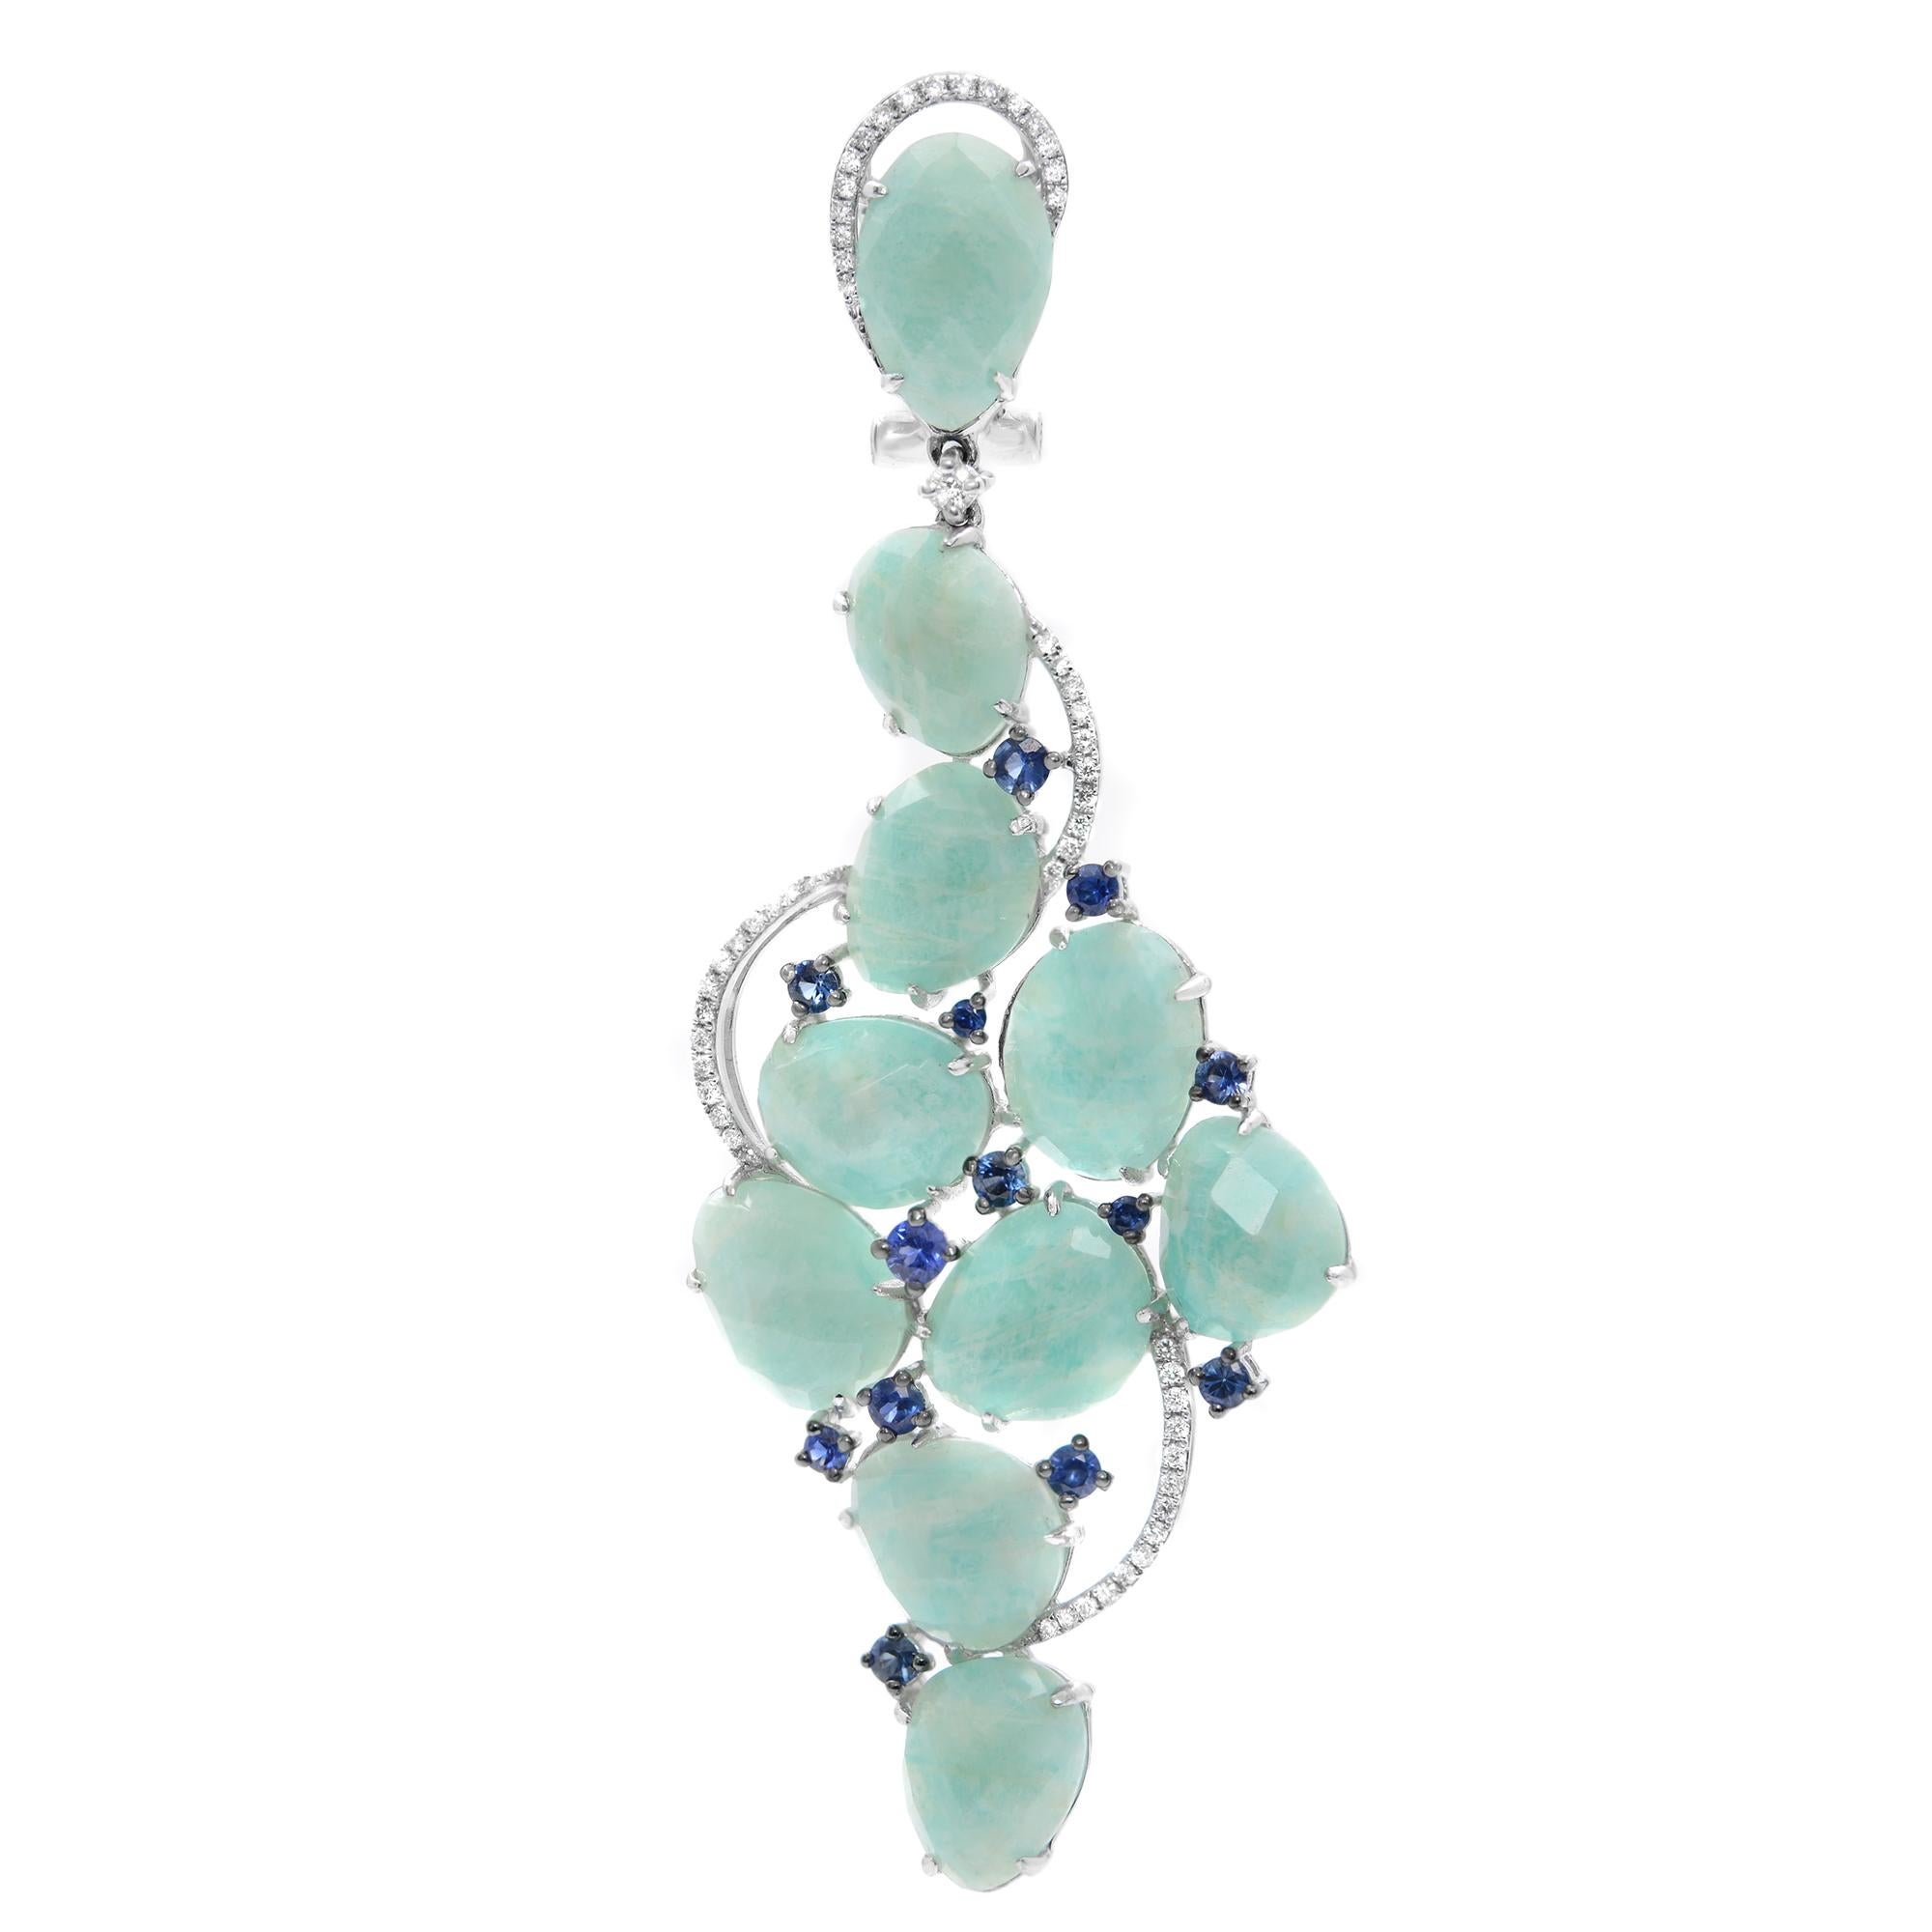 Beautiful Amazonite, Blue Sapphire & Diamonds Drop Earrings. Crafted in 14k white gold. Total diamond weight: 0.65. Earring length: 2.75 inches. Comes with a presentable gift box. 